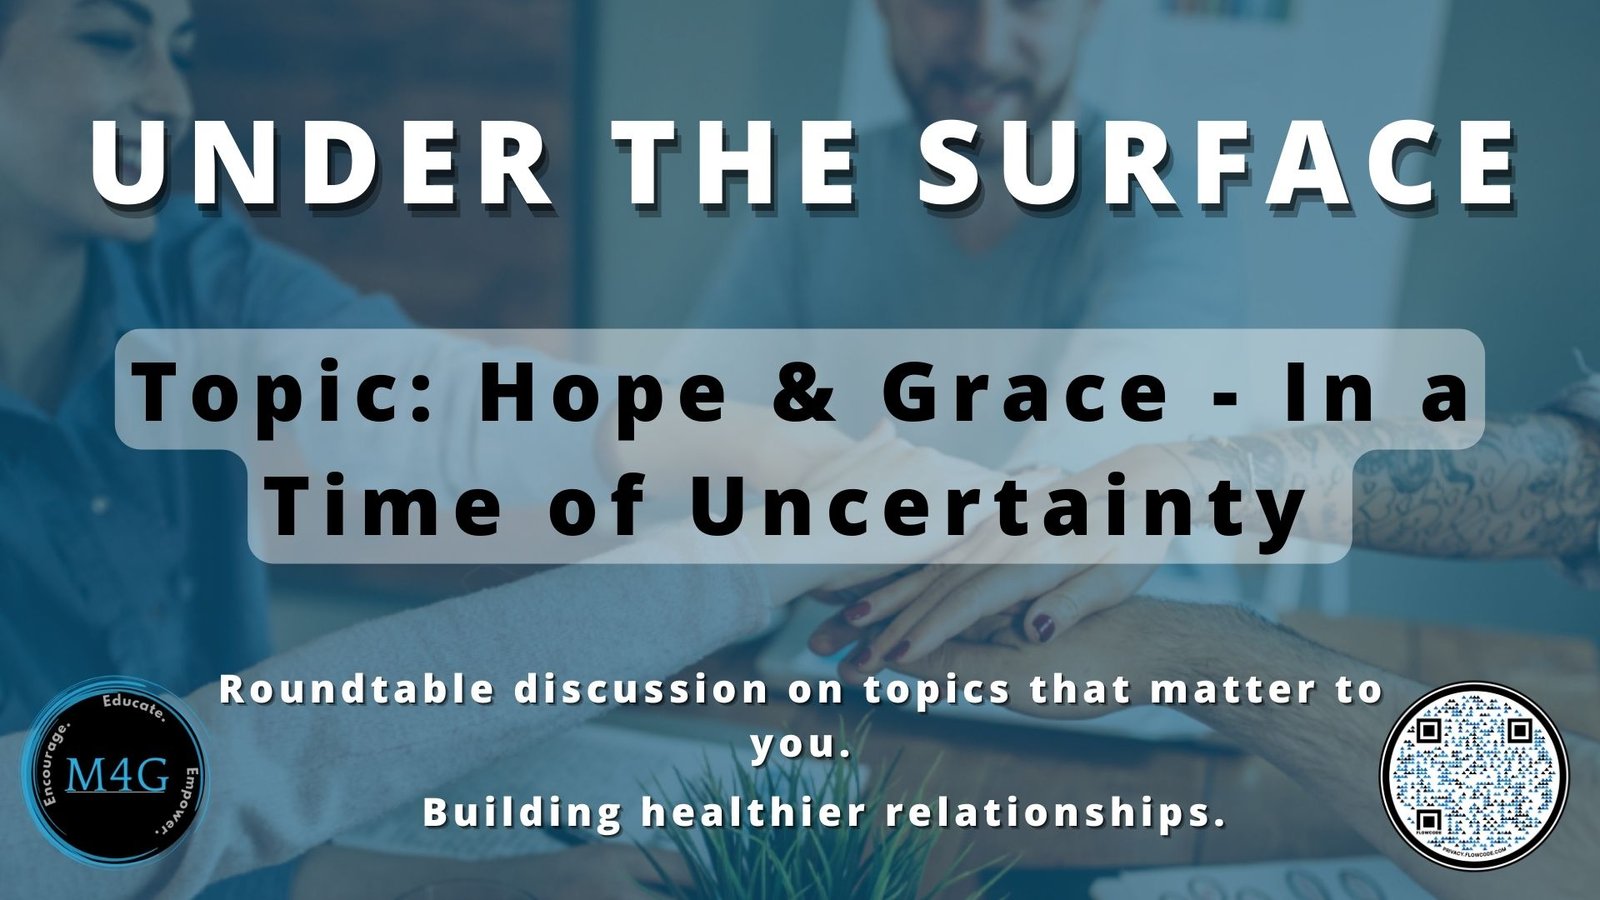 Under the Surface: Season 2, Episode 4 - Hope & Grace - In a Time of Uncertainty